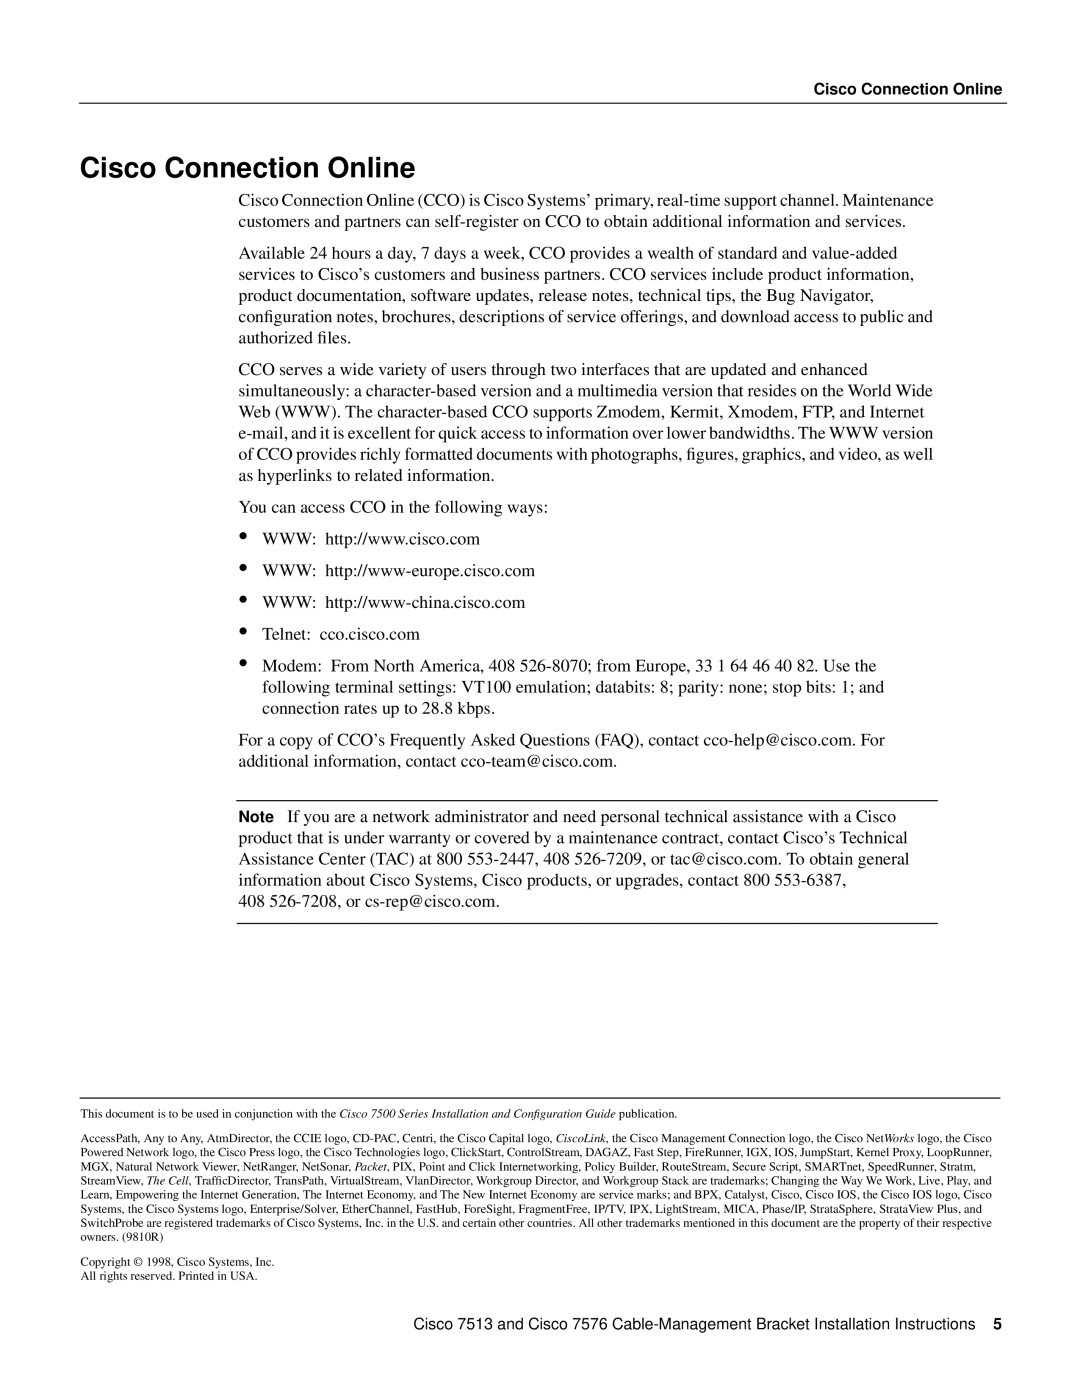 Cisco Systems Cisco 7513/7576 installation instructions Cisco Connection Online 